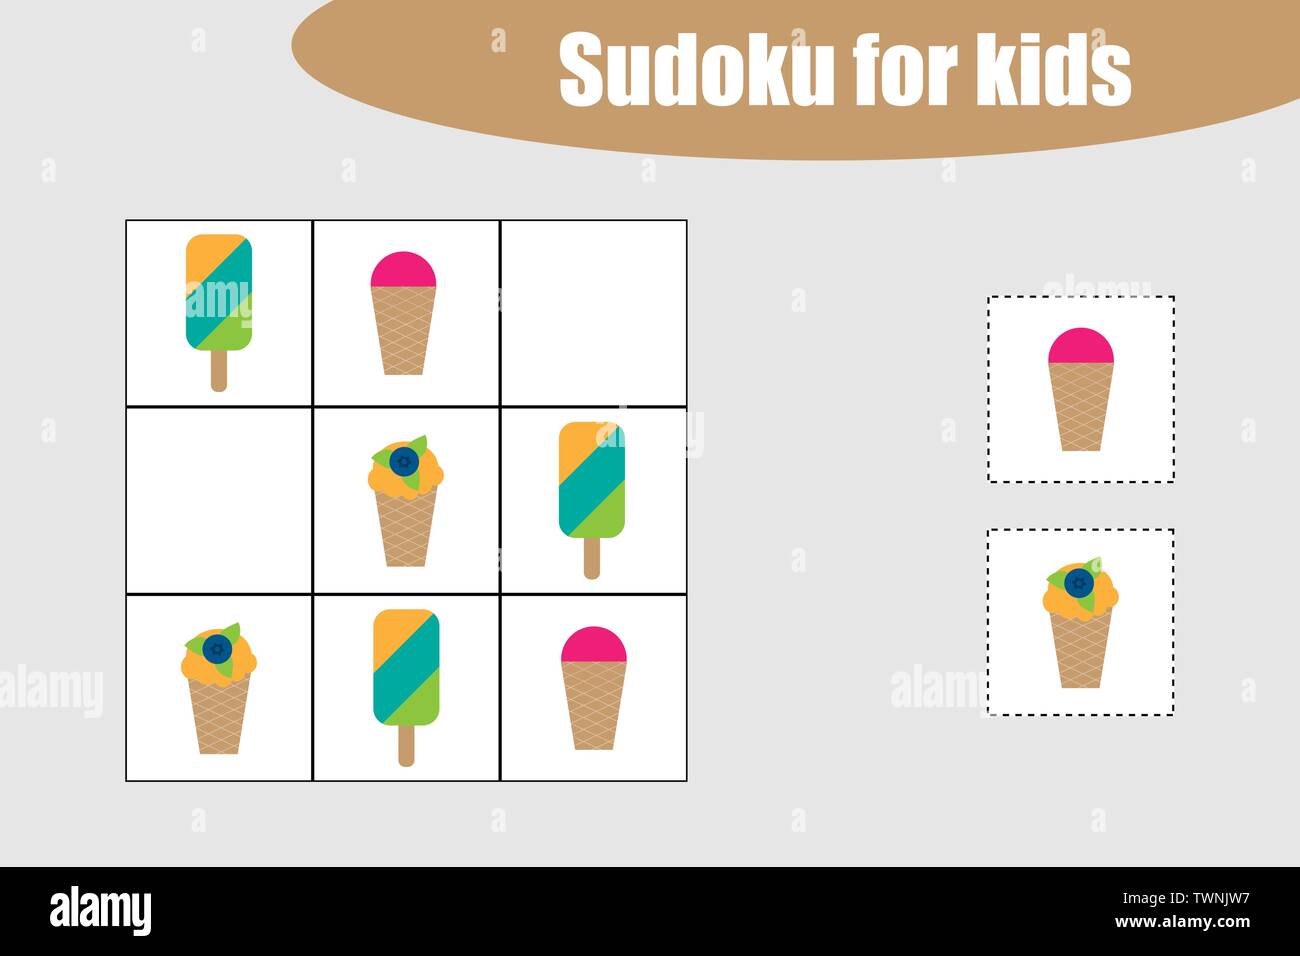 First Sudoku game with ice creams pictures for children, easy level, education game for kids, preschool worksheet activity, task for the development o Stock Vector